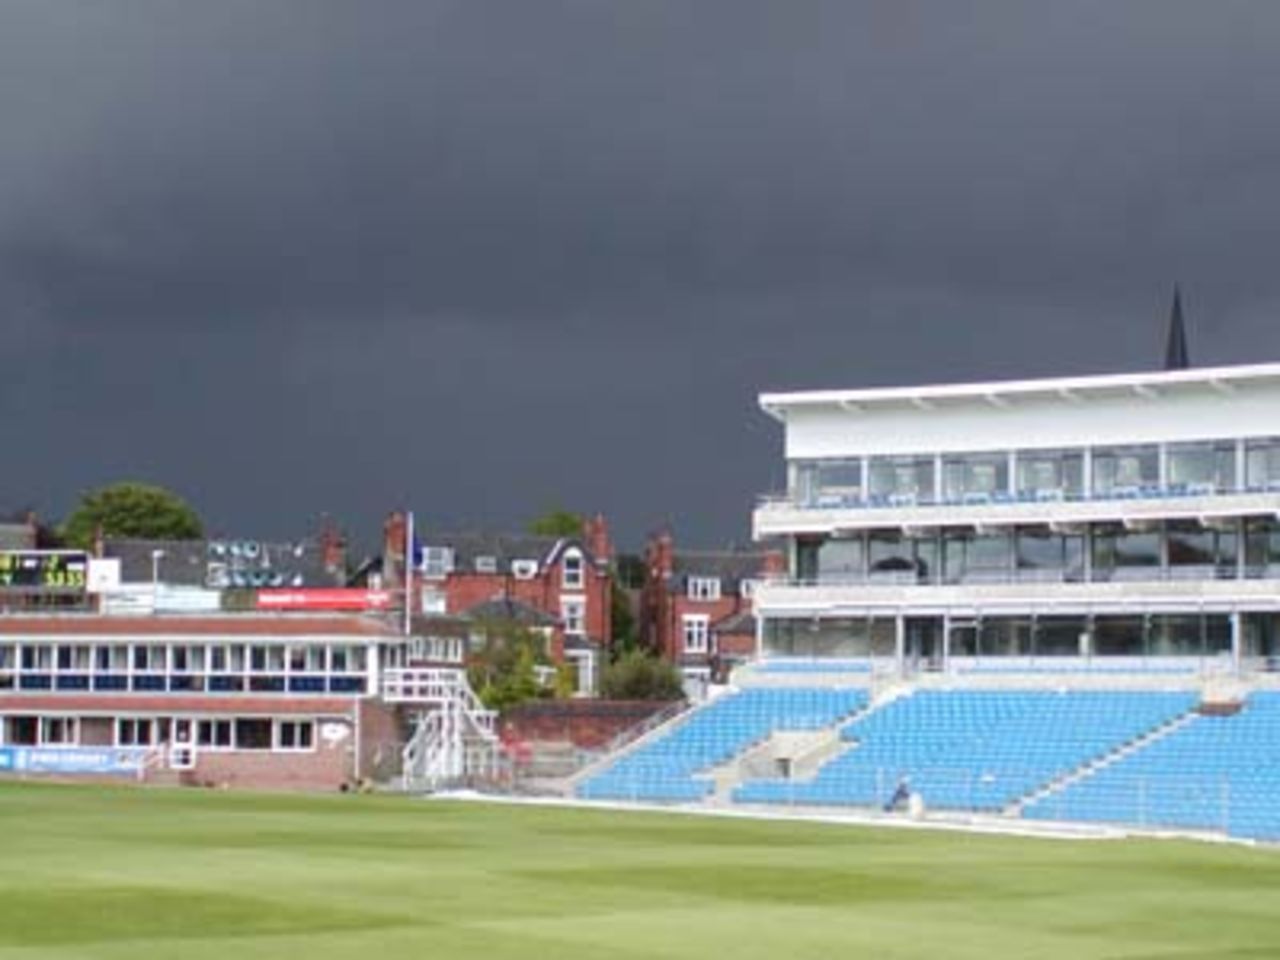 Hampshire frustrated by more storm clouds as rain and bad late allow only 10 overs on Day 3.